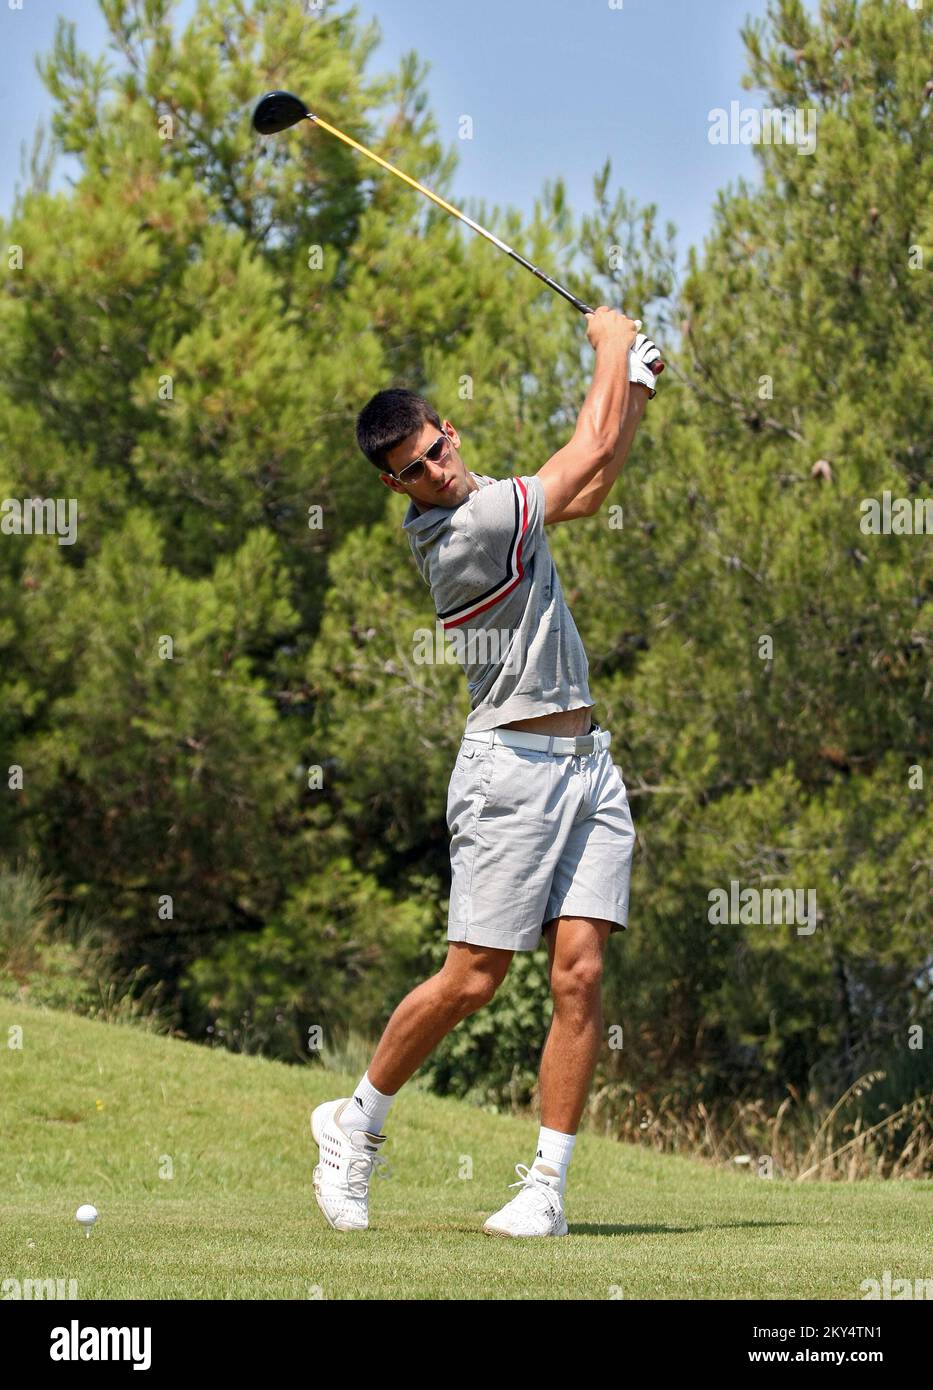 Novak Djokovic in action during a round of golf in Croatia Stock Photo -  Alamy